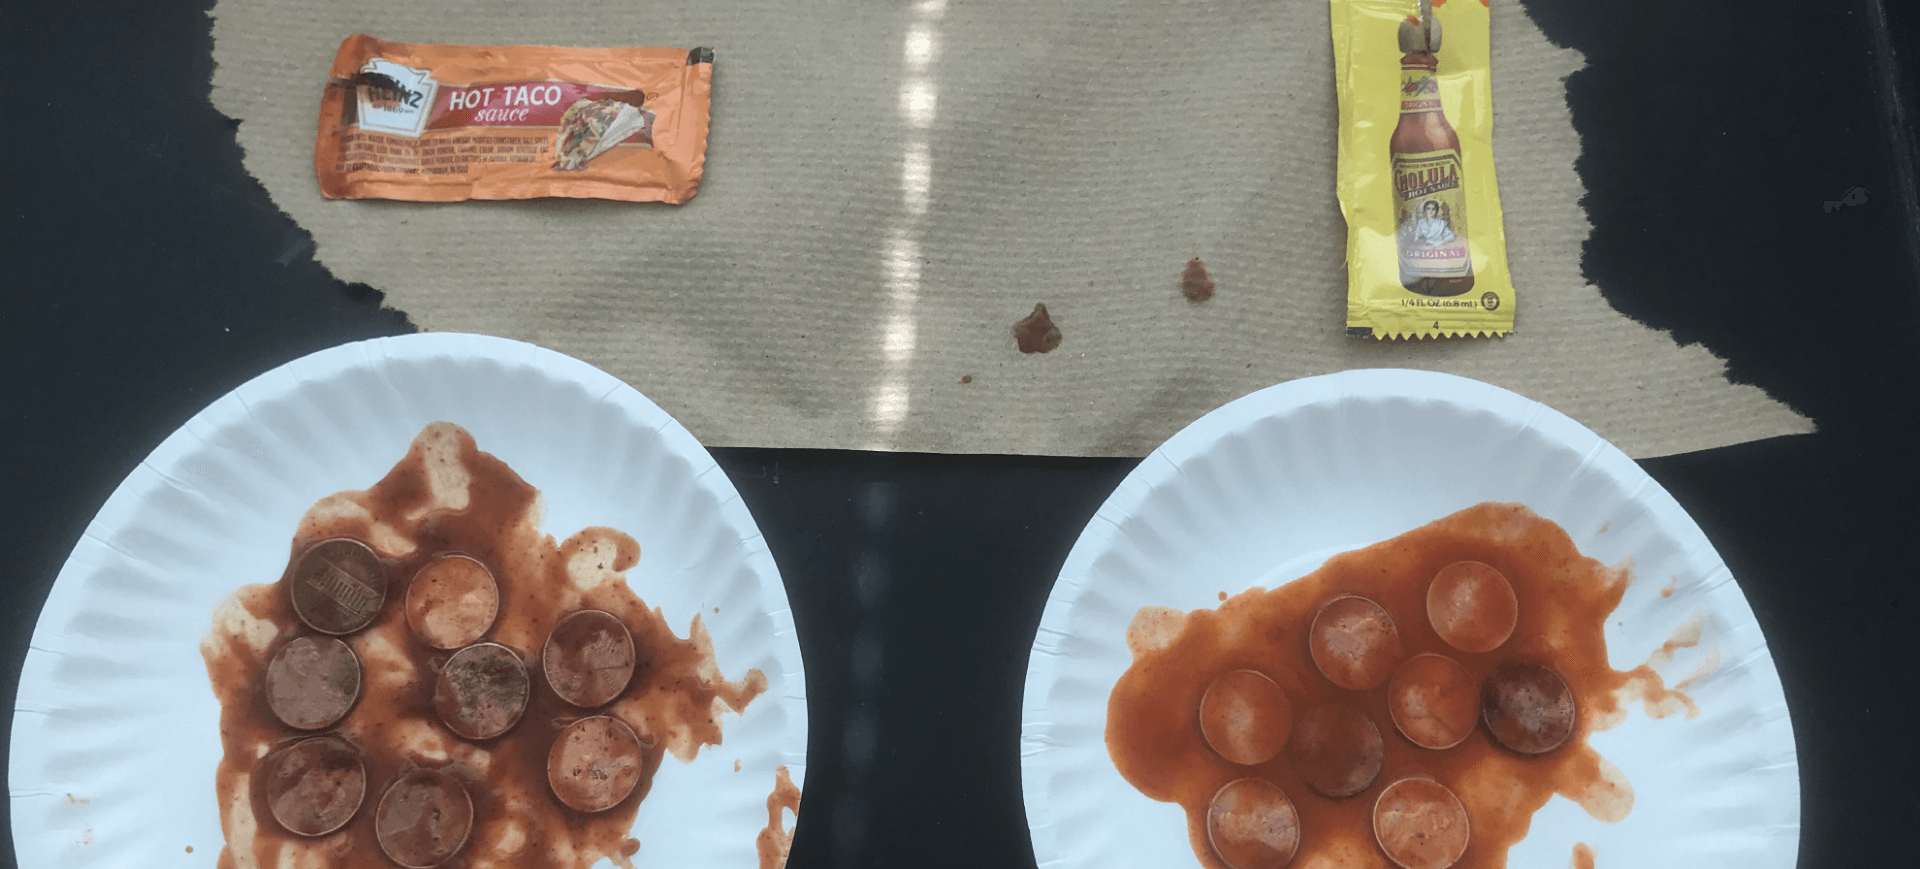 Cleaning Pennies with Taco Sauce